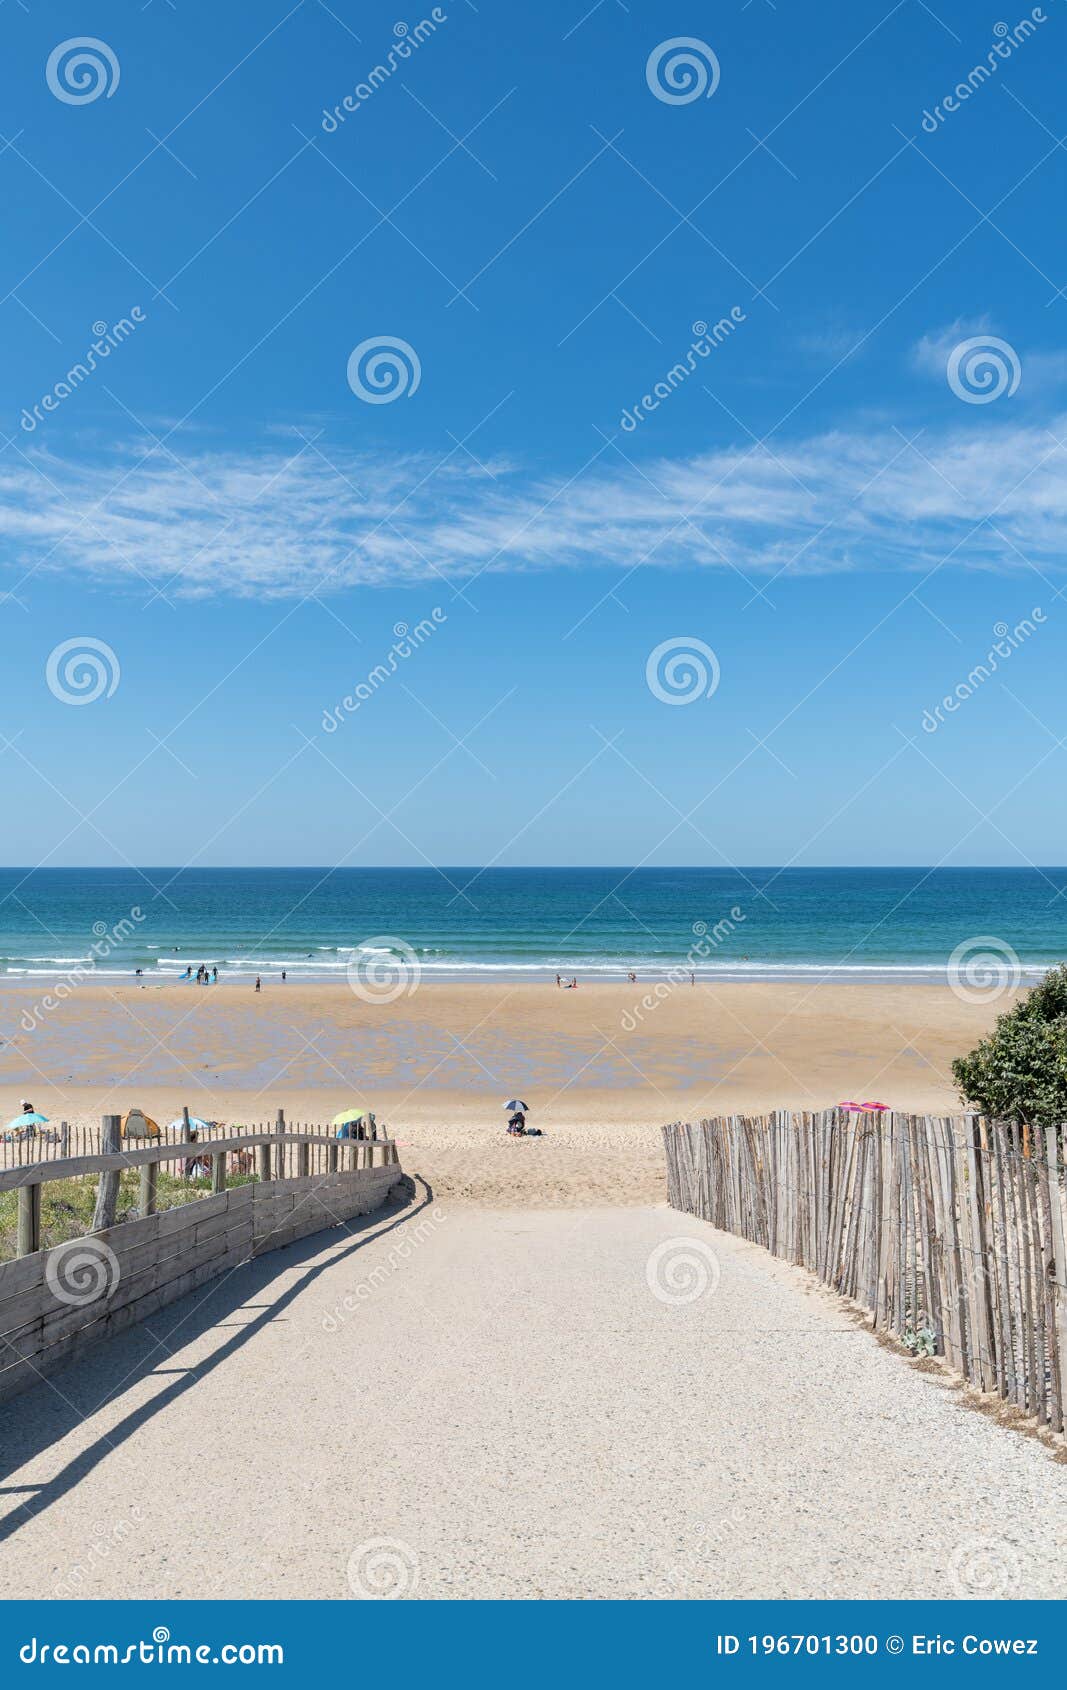 access to the beach of biscarrosse, france